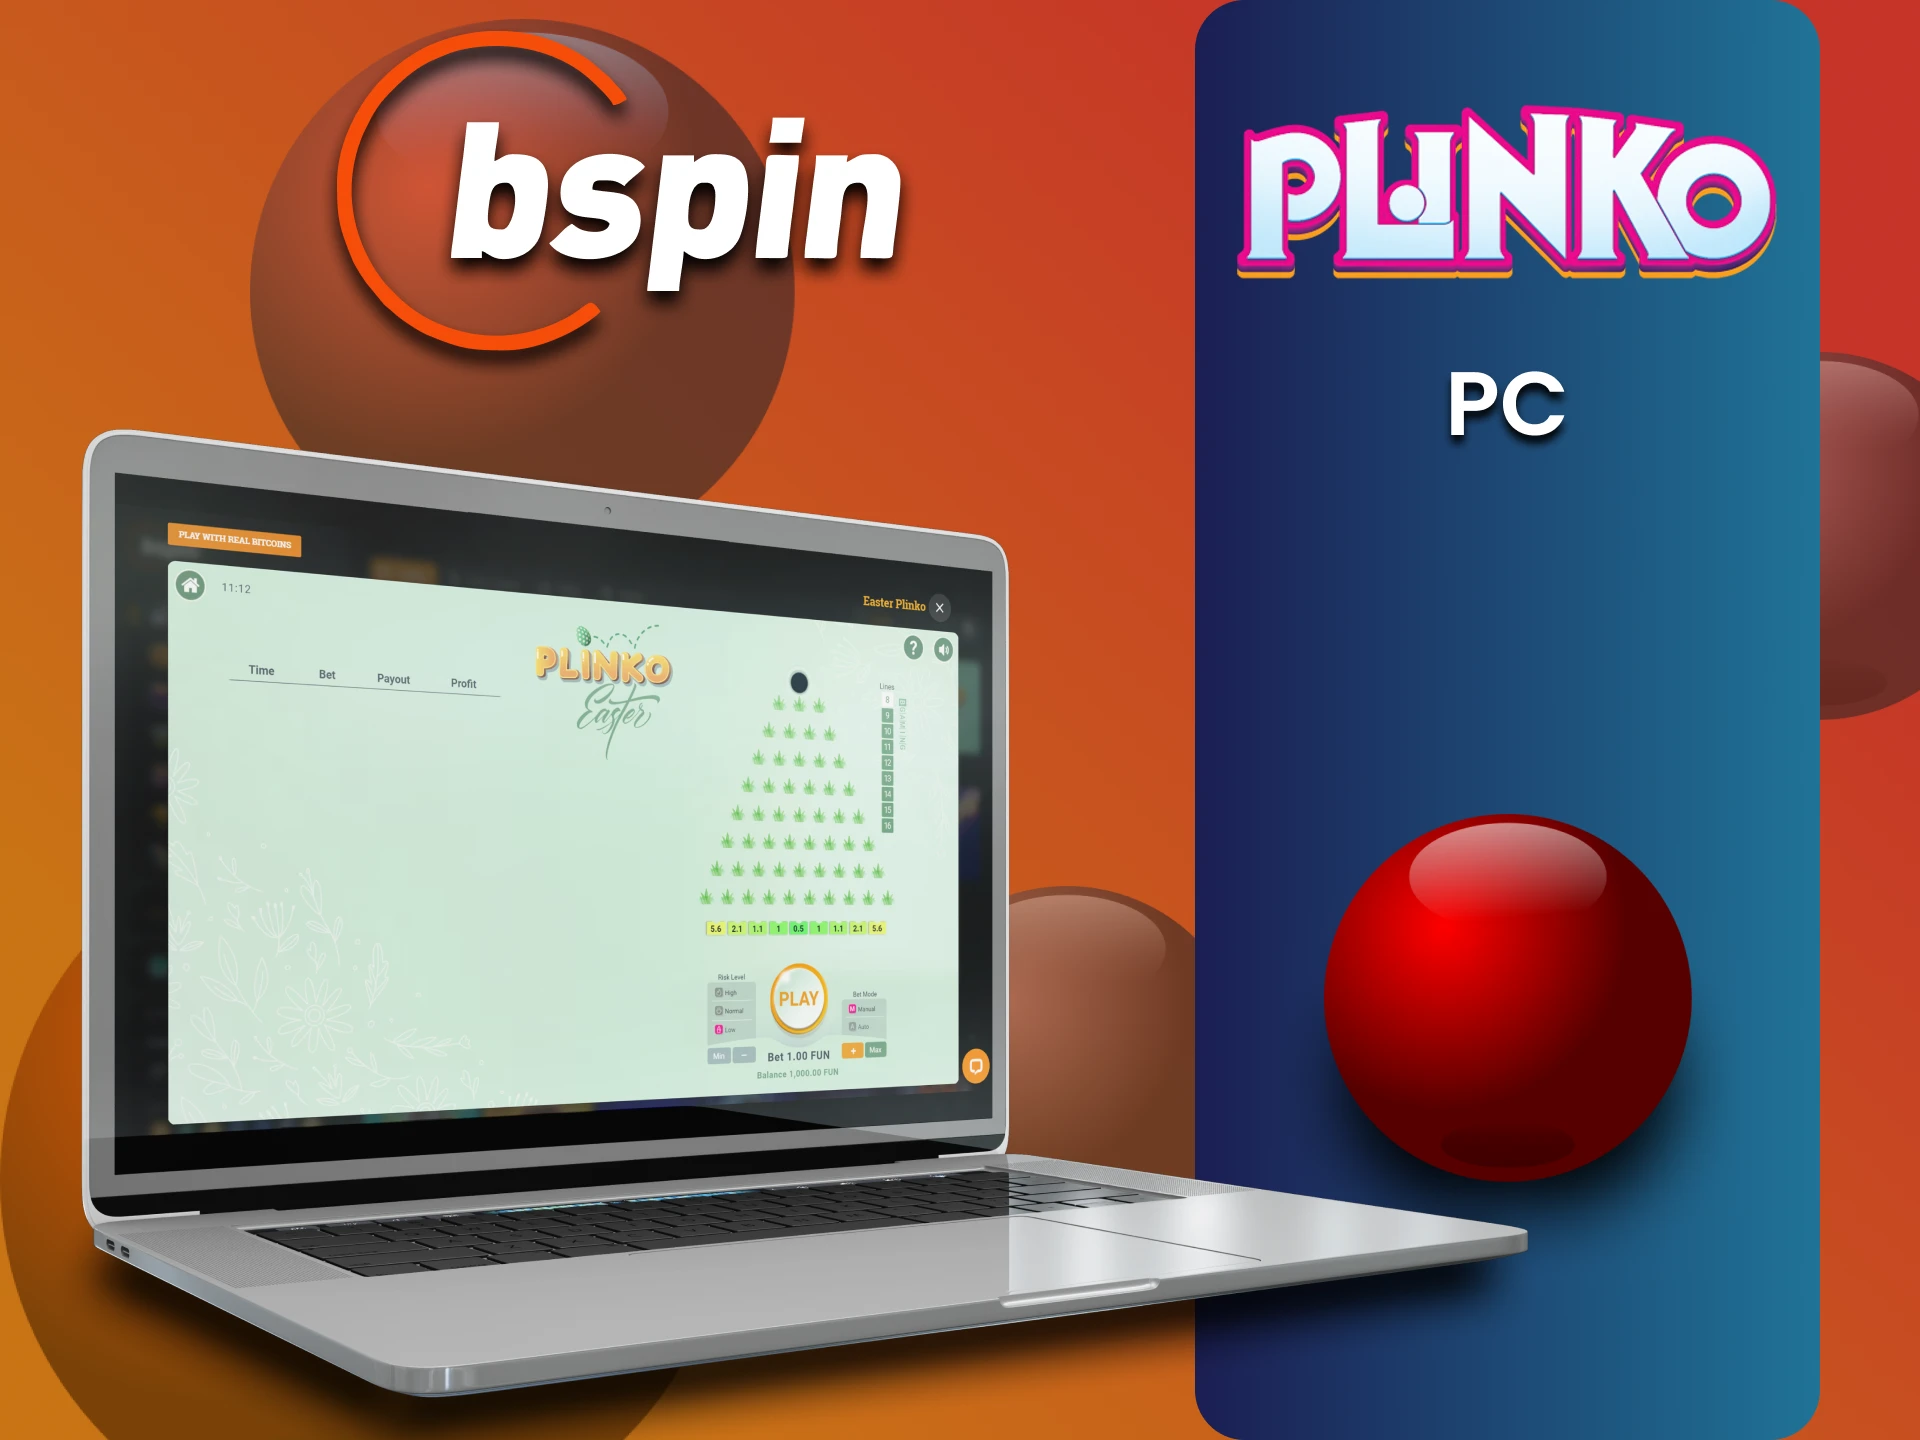 PC is one of the ways to play Plinko on the Bspin website.